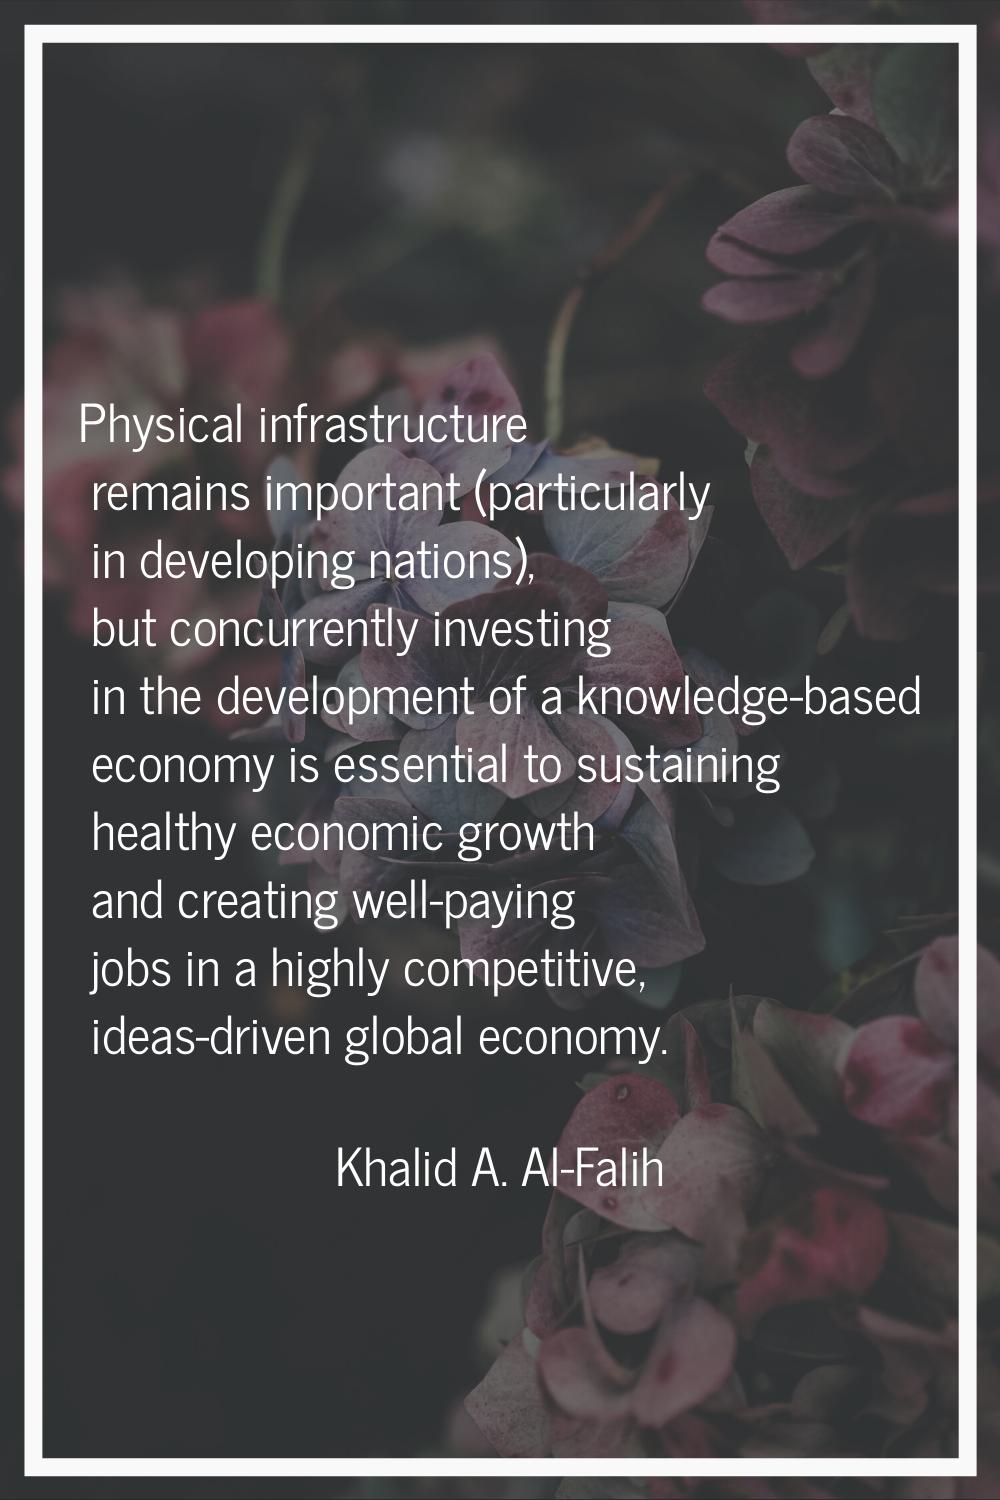 Physical infrastructure remains important (particularly in developing nations), but concurrently in